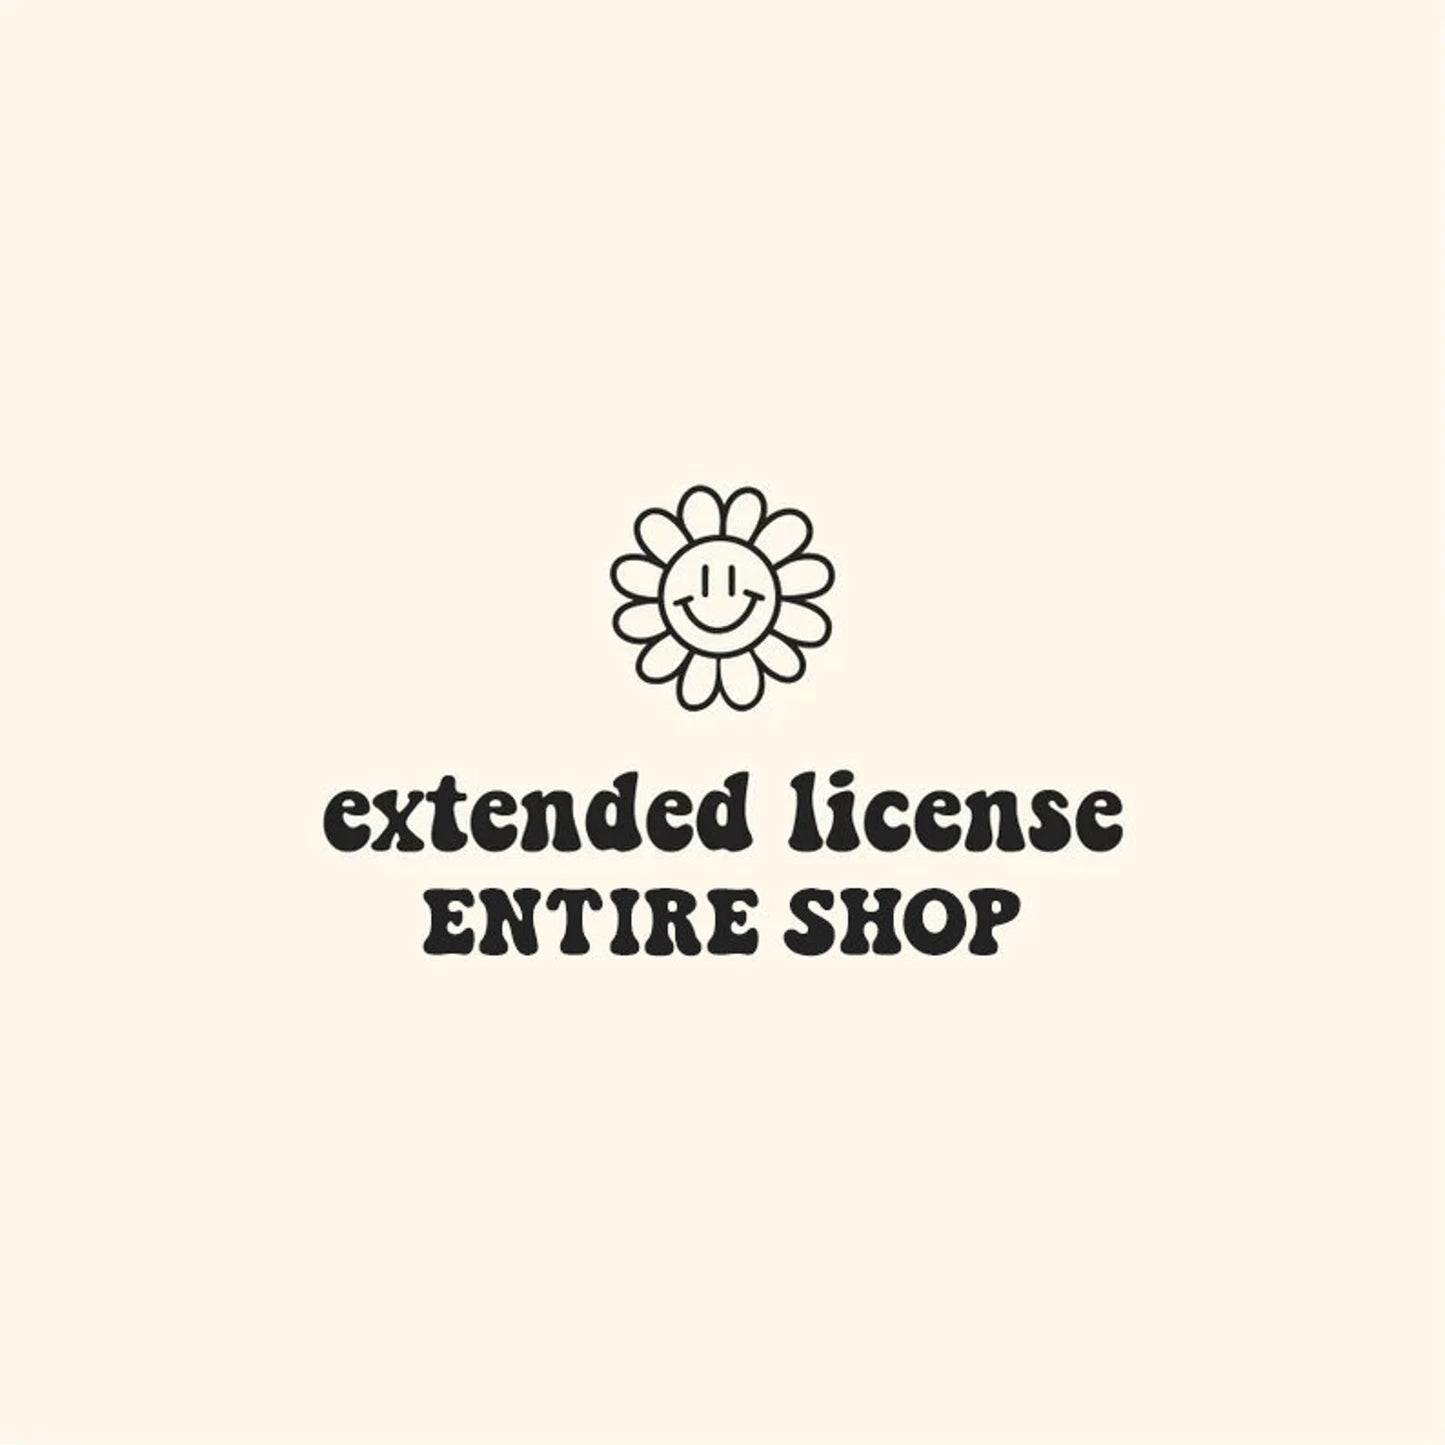 EXTENDED LICENSE | ENTIRE SHOP